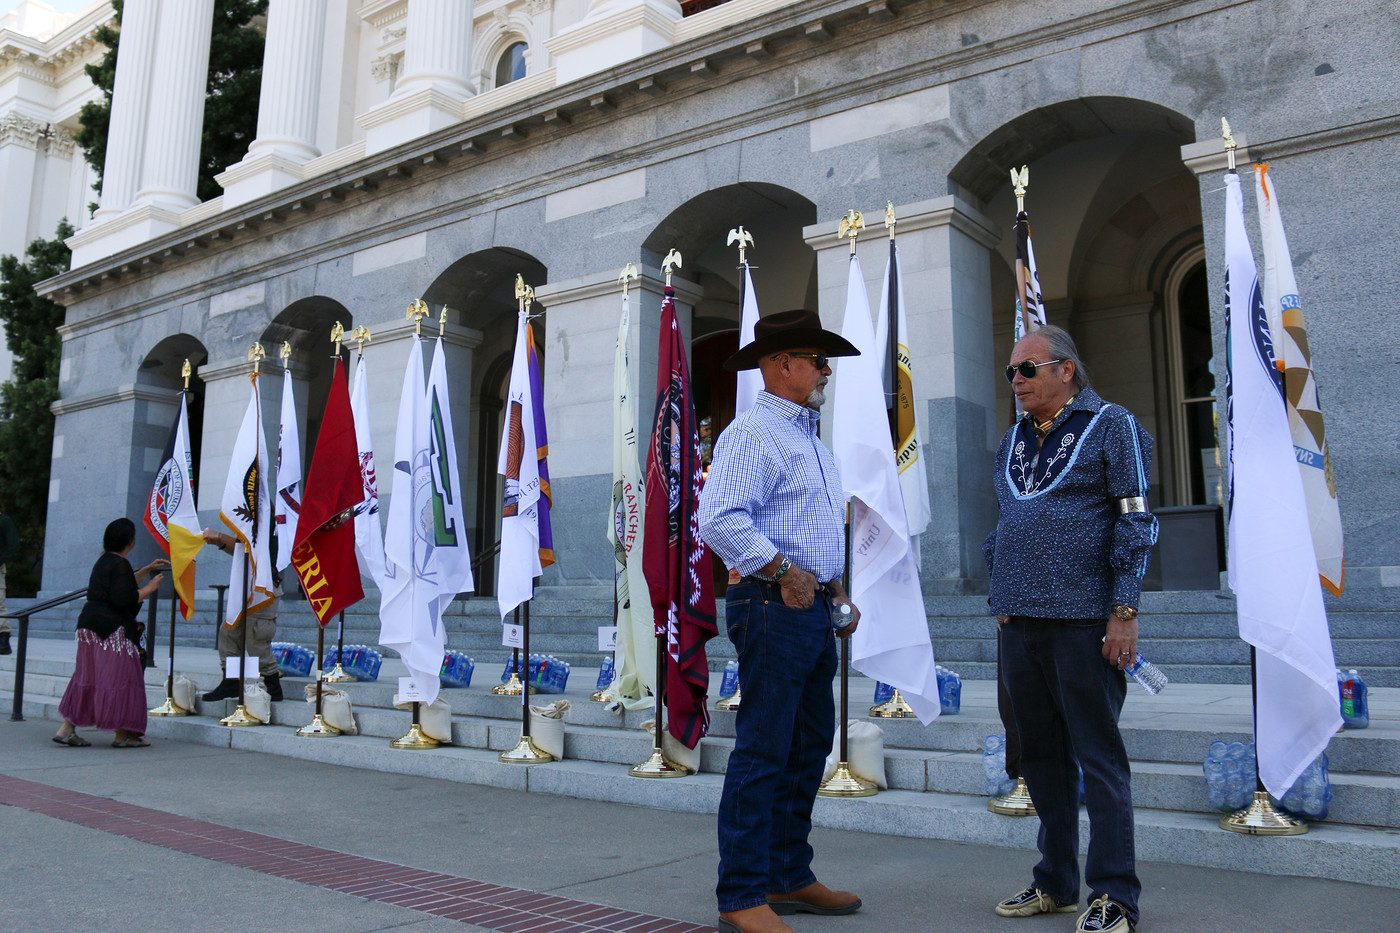 Dave Toler (left), a San Pasqual reservation counselor talks with Bill Gollnick, a tribal administrator for the Tejon tribe, at the 2016 Native American Day event. Behind them, flags of California tribes placed on the west steps of the State Capitol. Sept. 23, 2016. Corey Browning | Staff Photographer | coreybrowningexpress@gmail.com